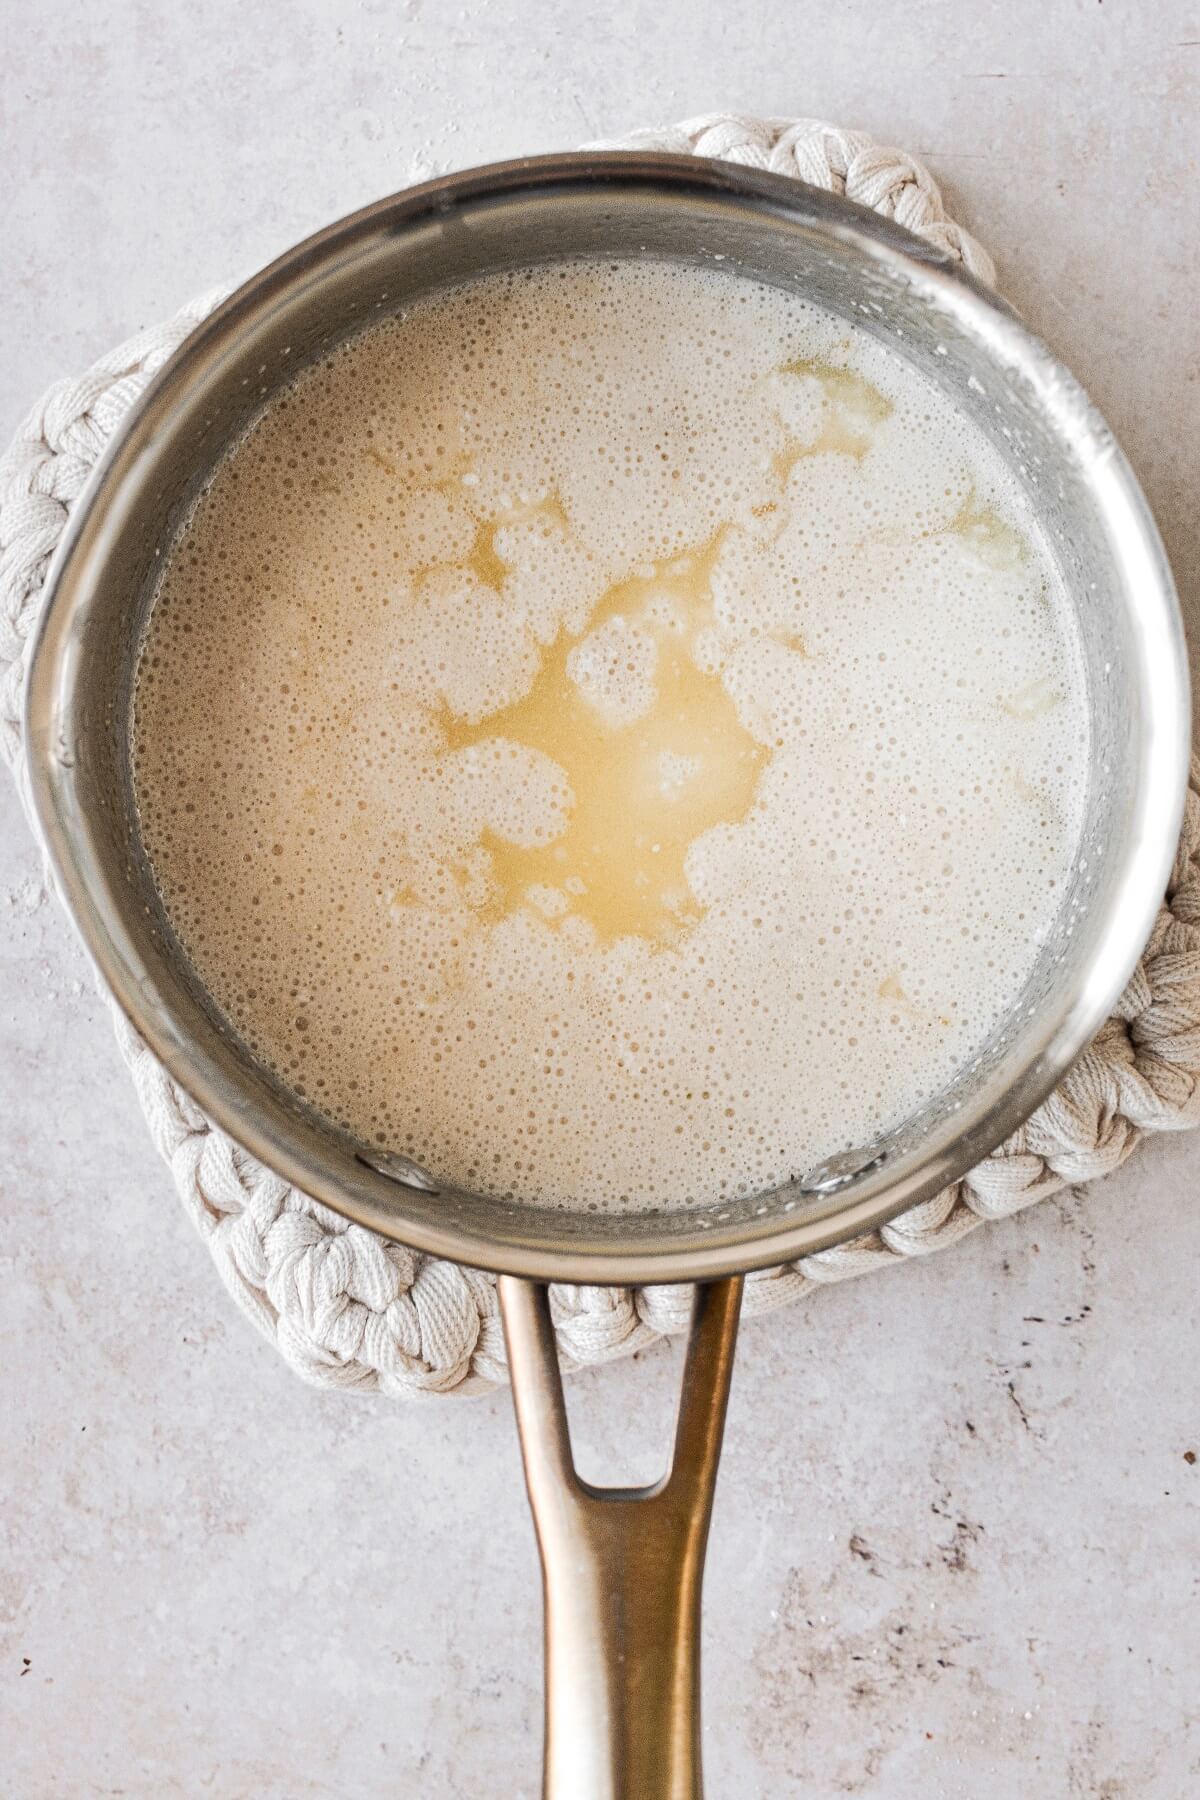 A saucepan of milk, butter and yeast.